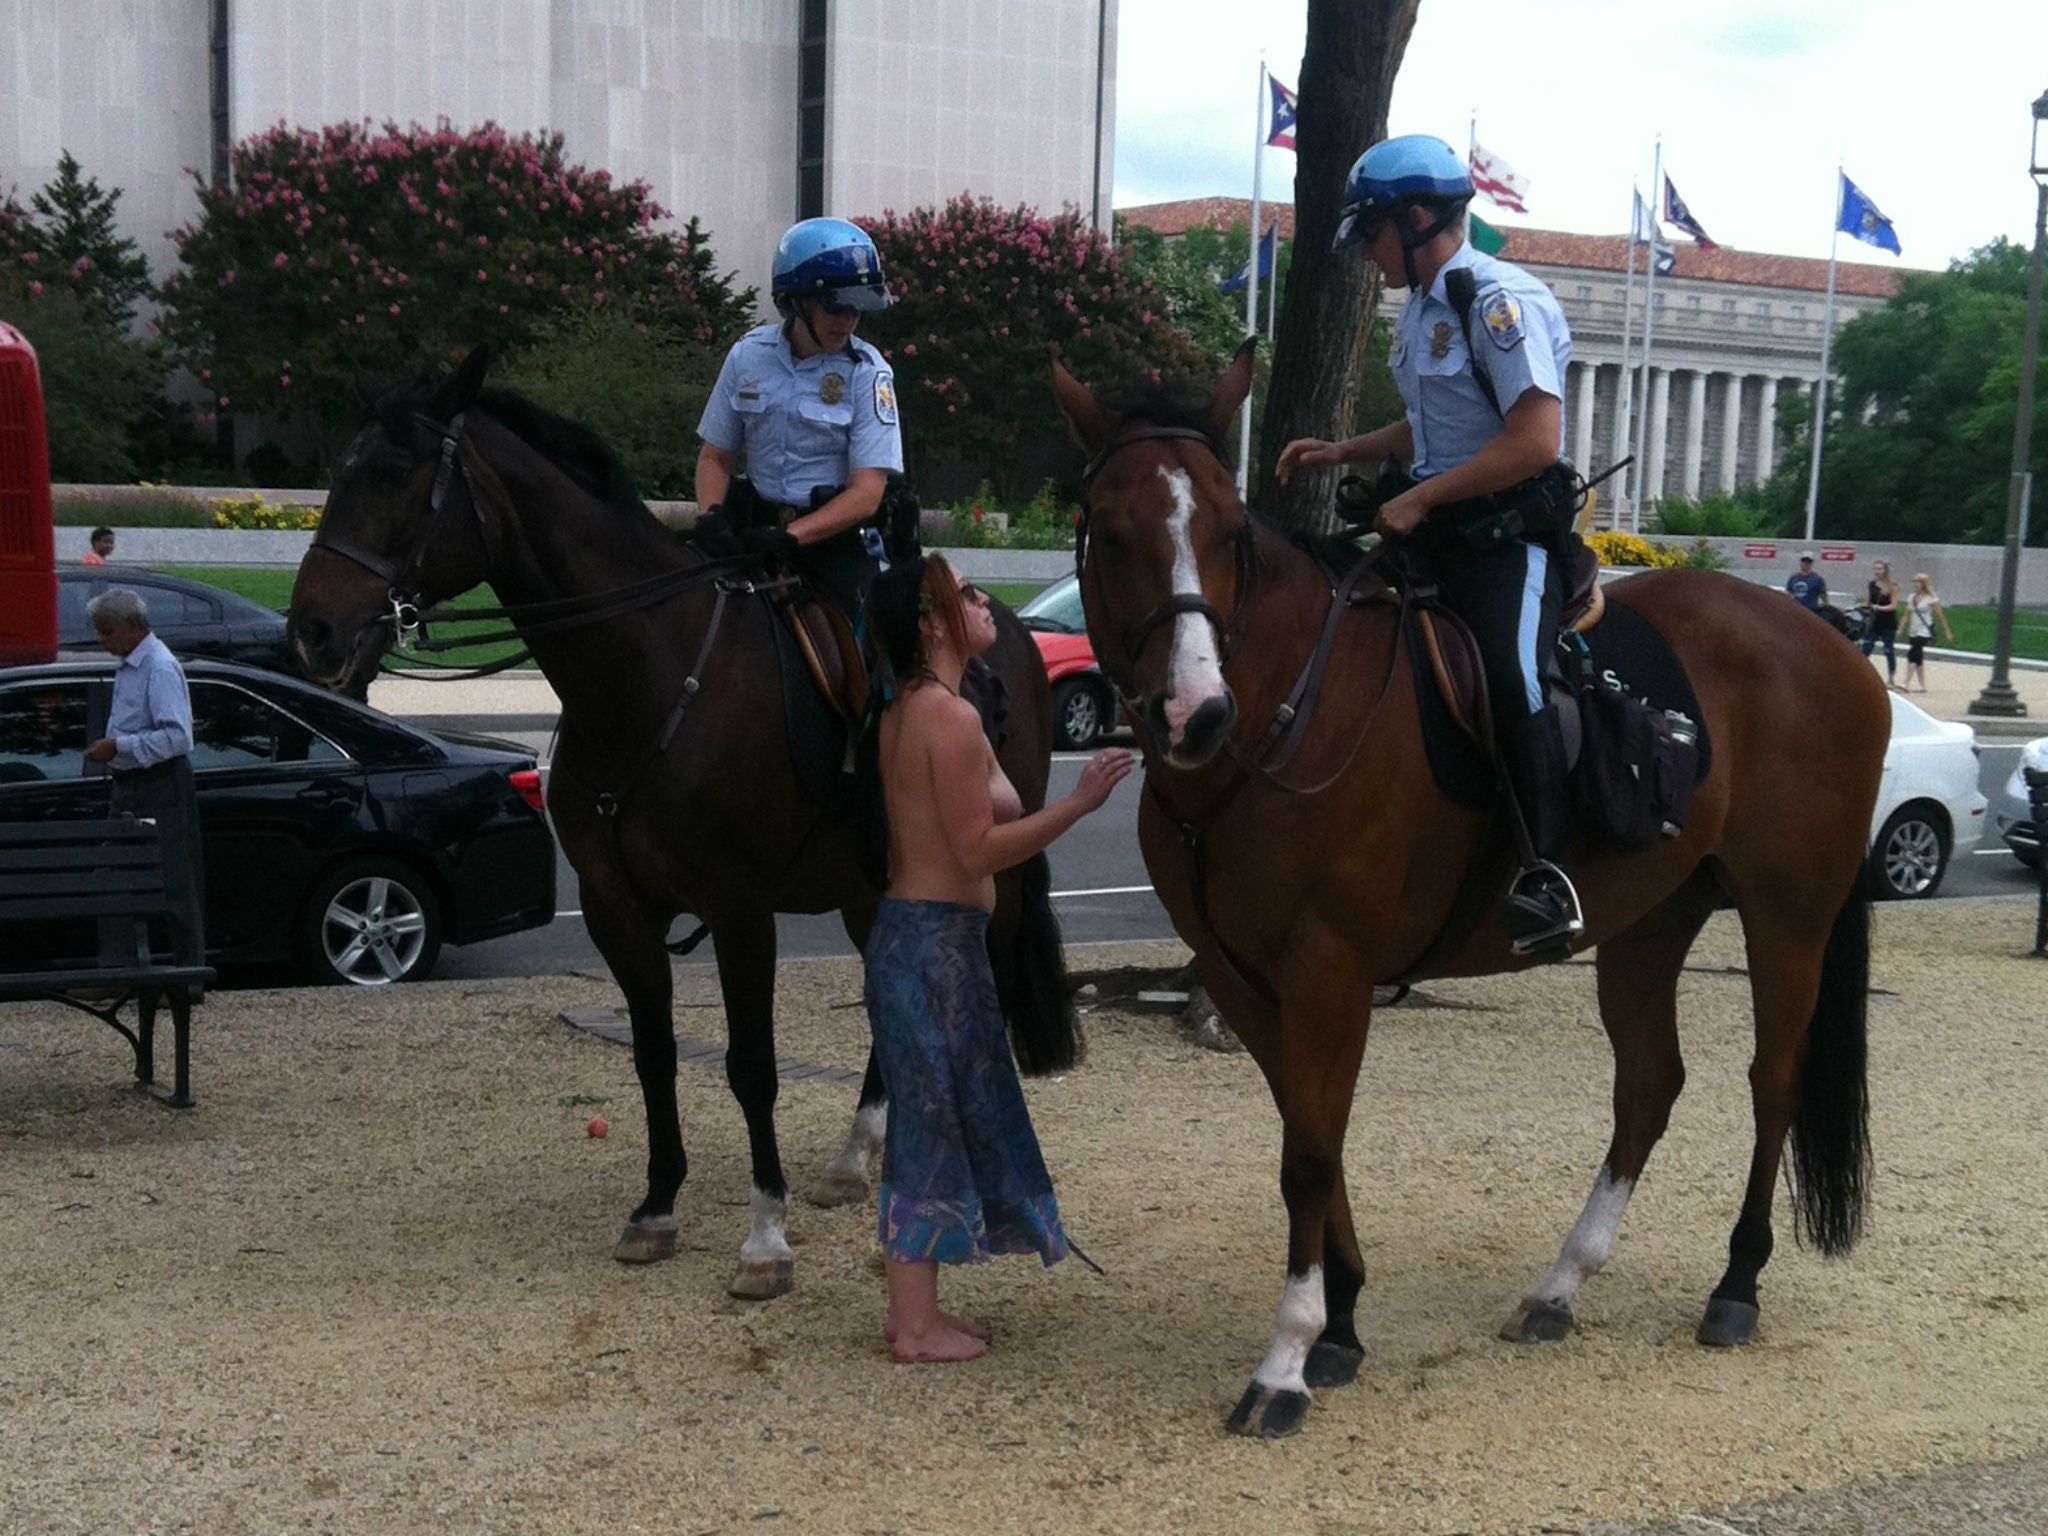 Chelsea Covington speaks to police in Washington DC (Breasts Are Healthy)